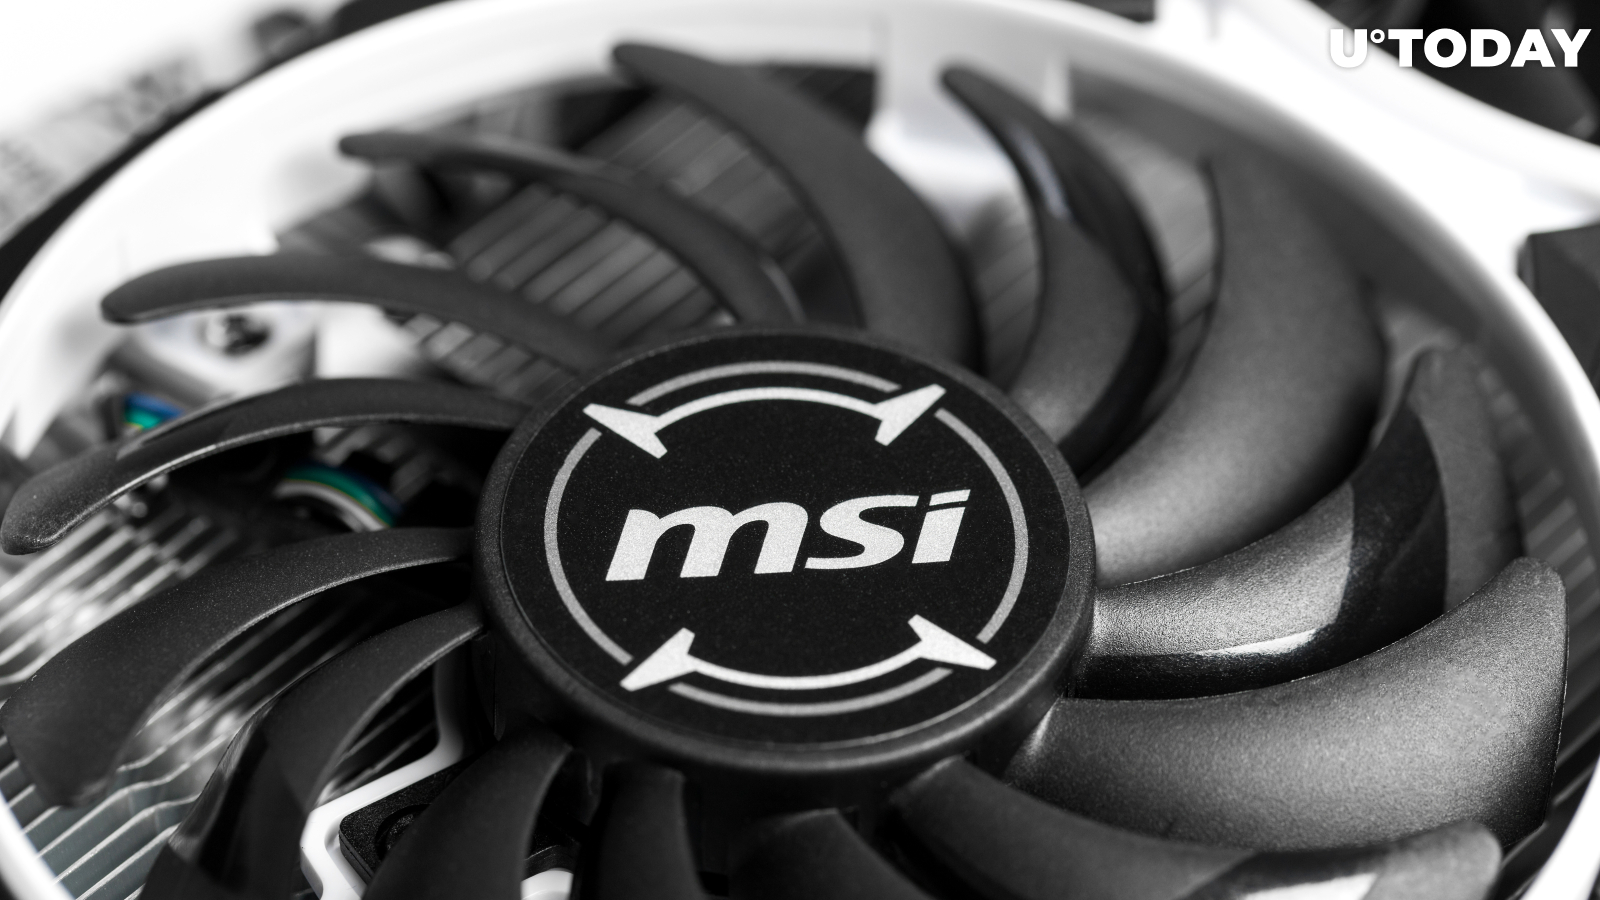 MSI Comes Up with Graphics Cards for Crypto Mining in Response to Nvidia's 'Ampere' GPUs    